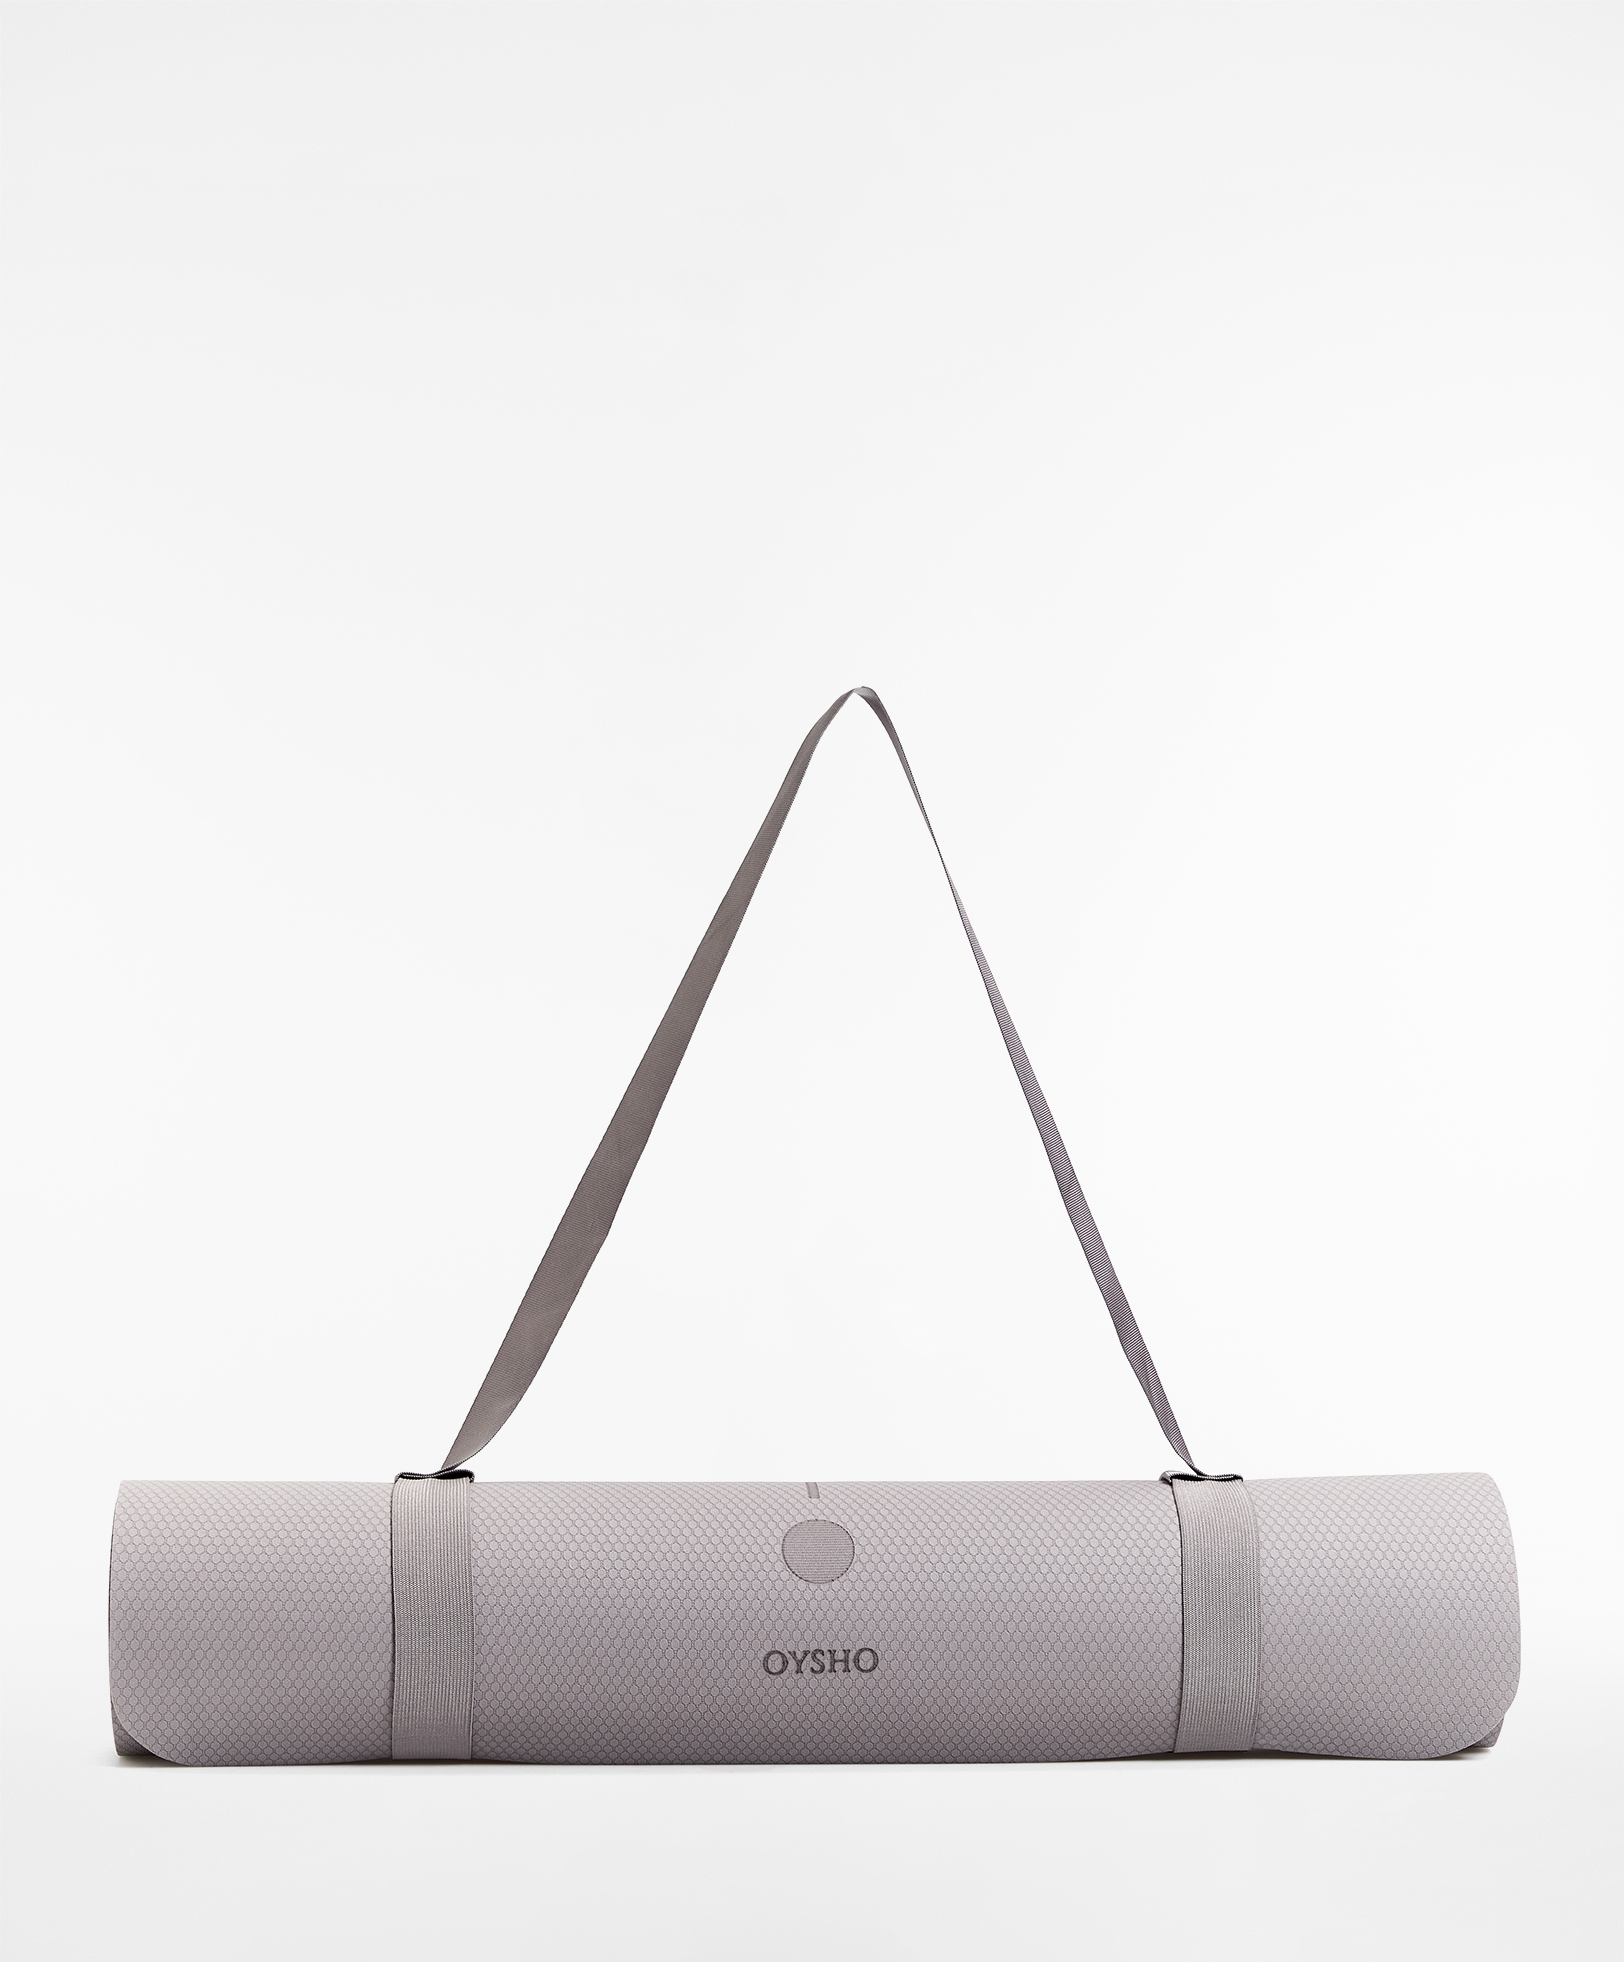 Oysho Sport, Extended reality and sports